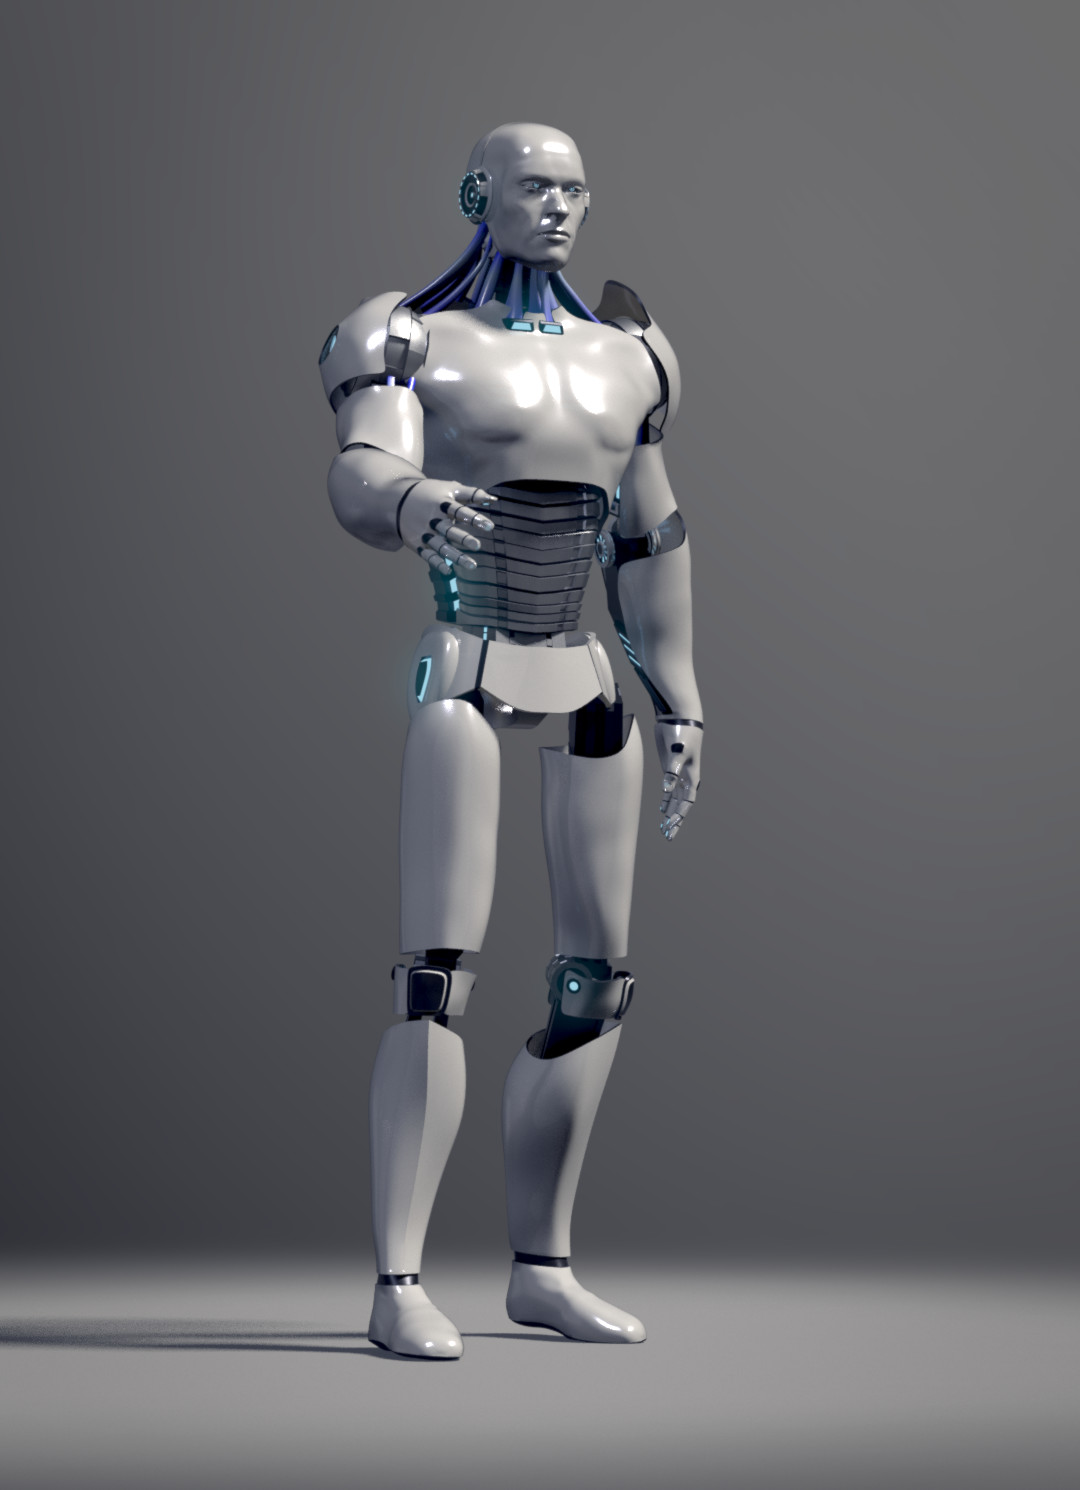 ArtStation - Male Android - 3D model | Resources